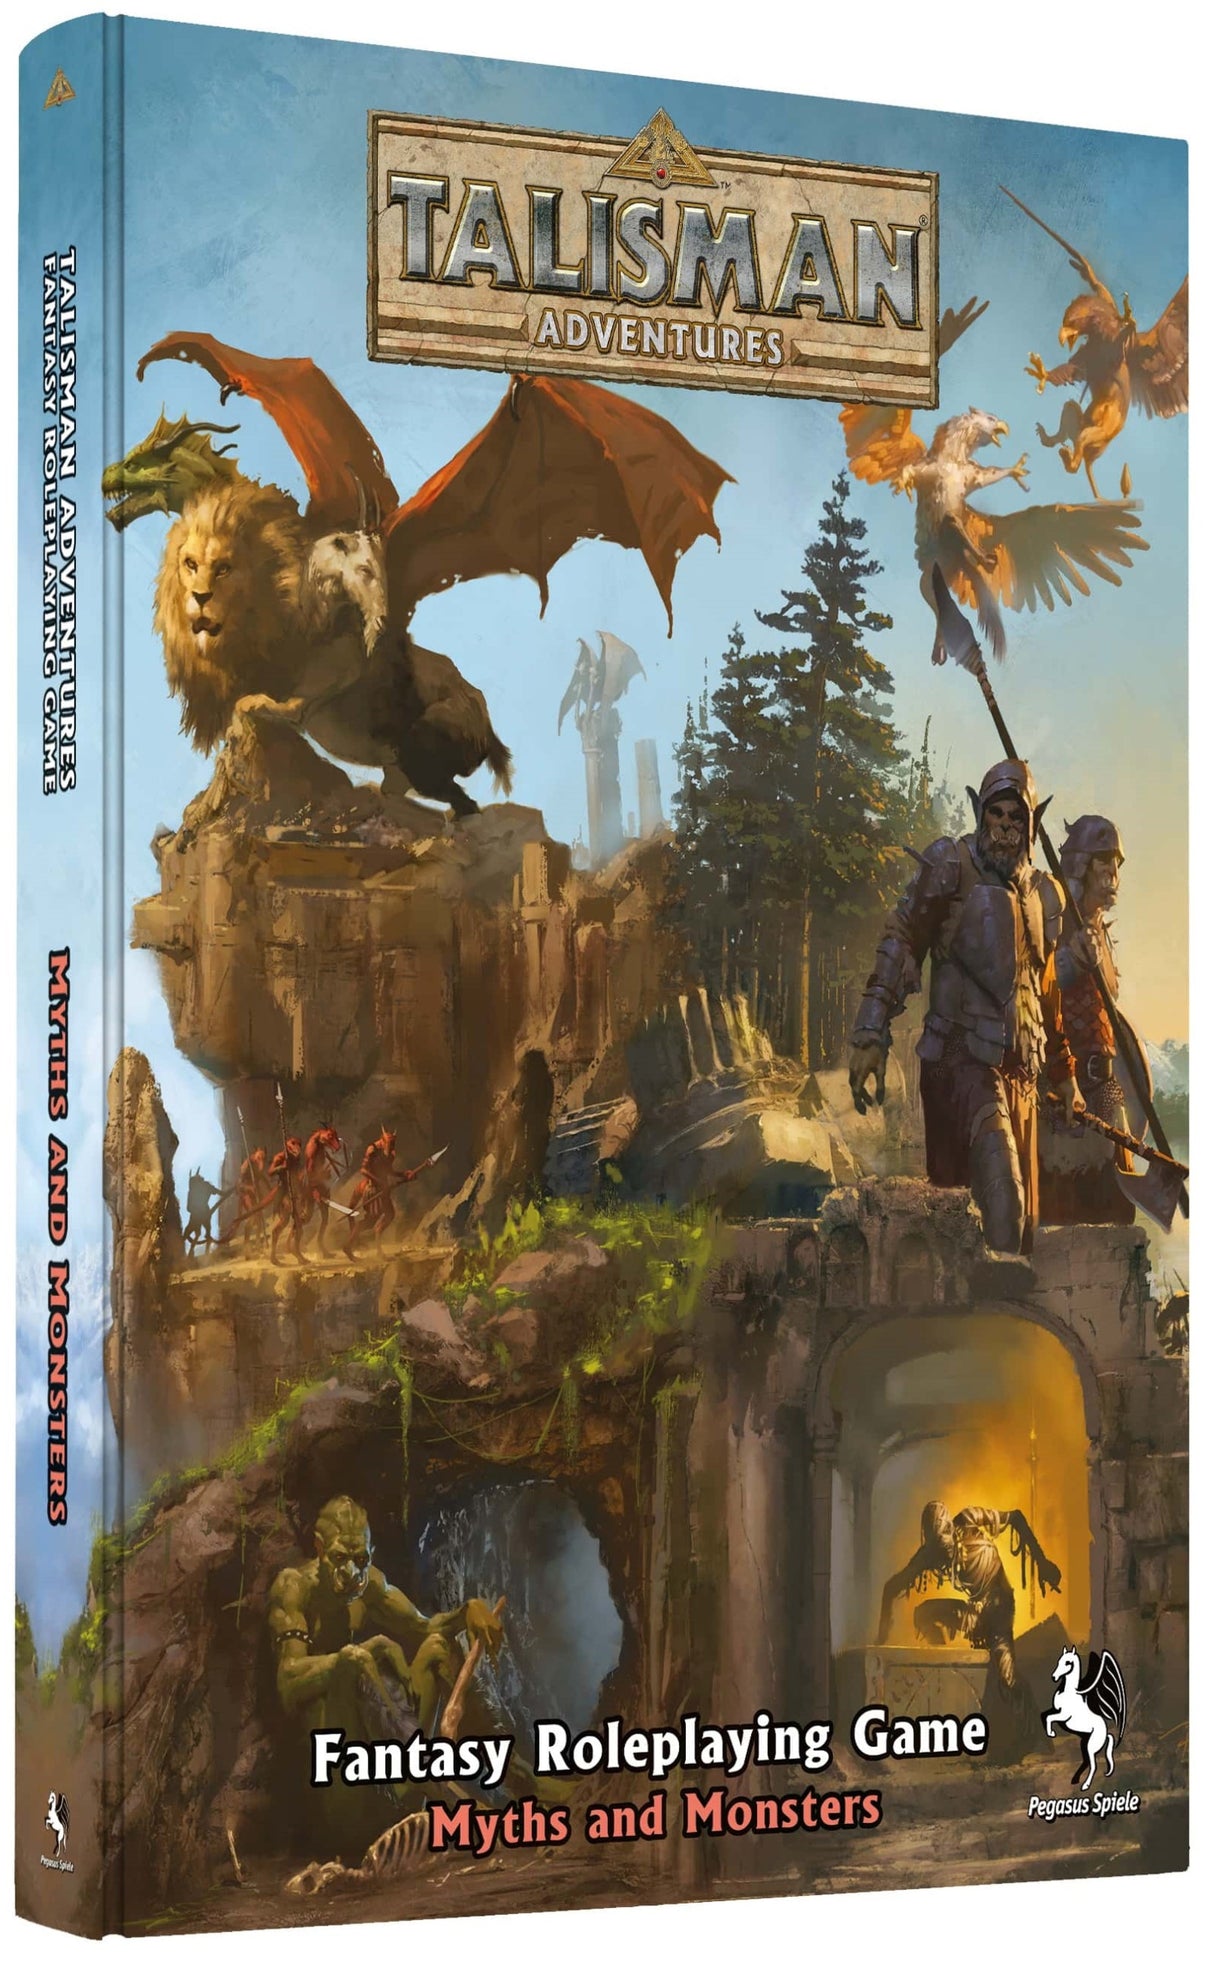 Myths and Monsters Talisman Adventures RPG